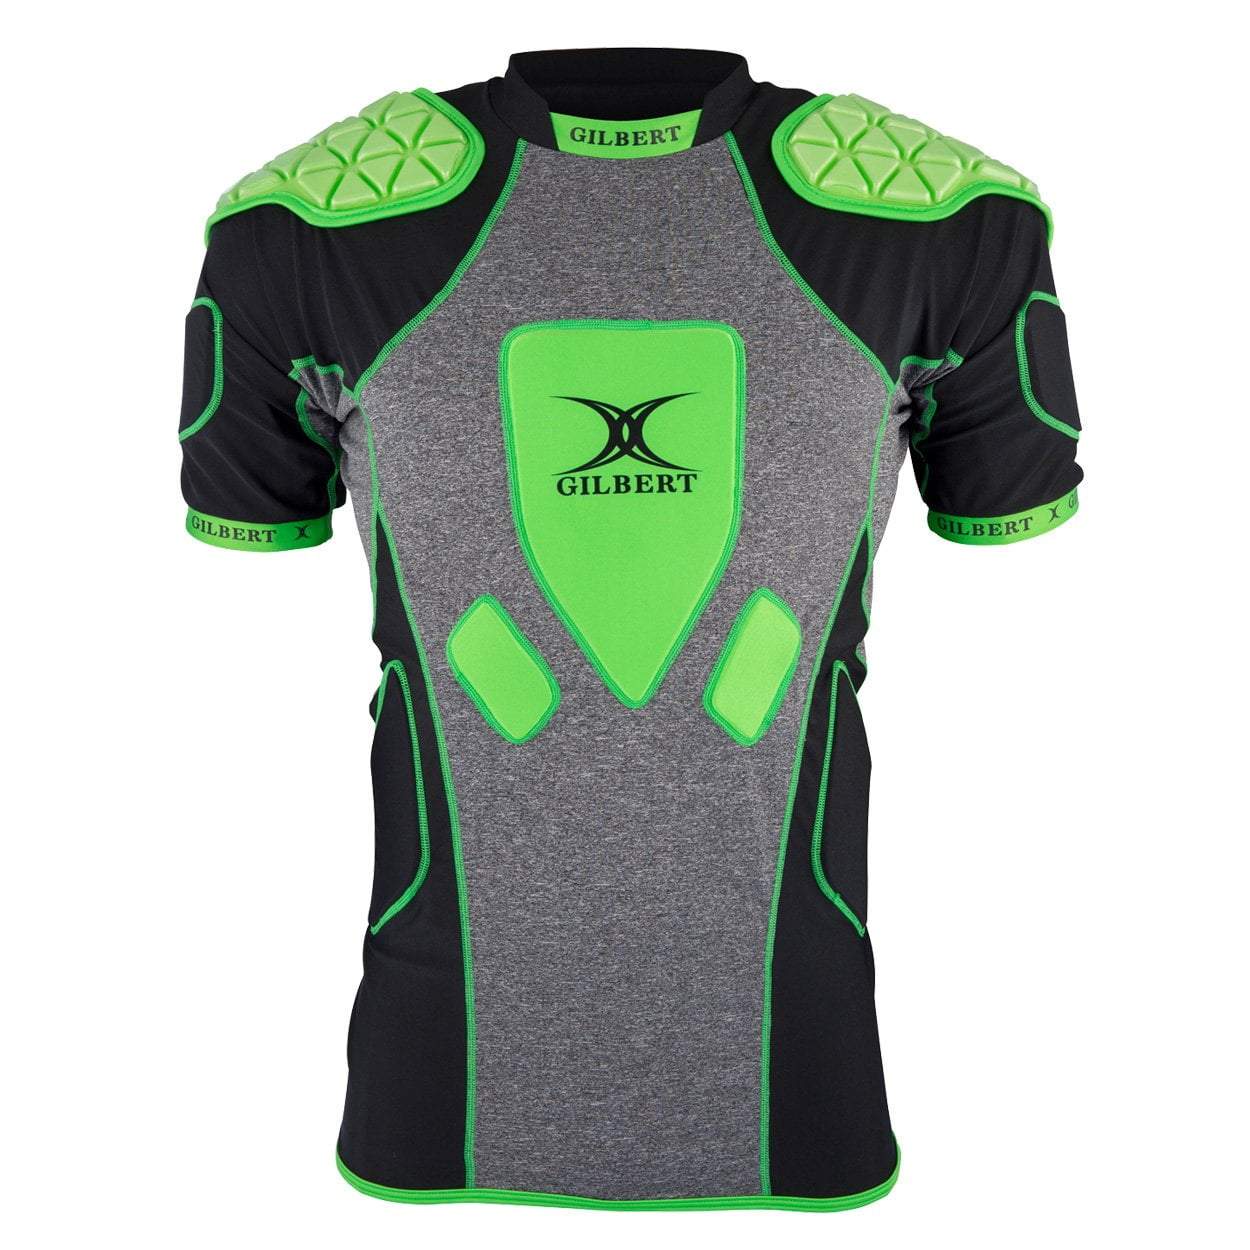 Maillots de Rugby > Oxygear